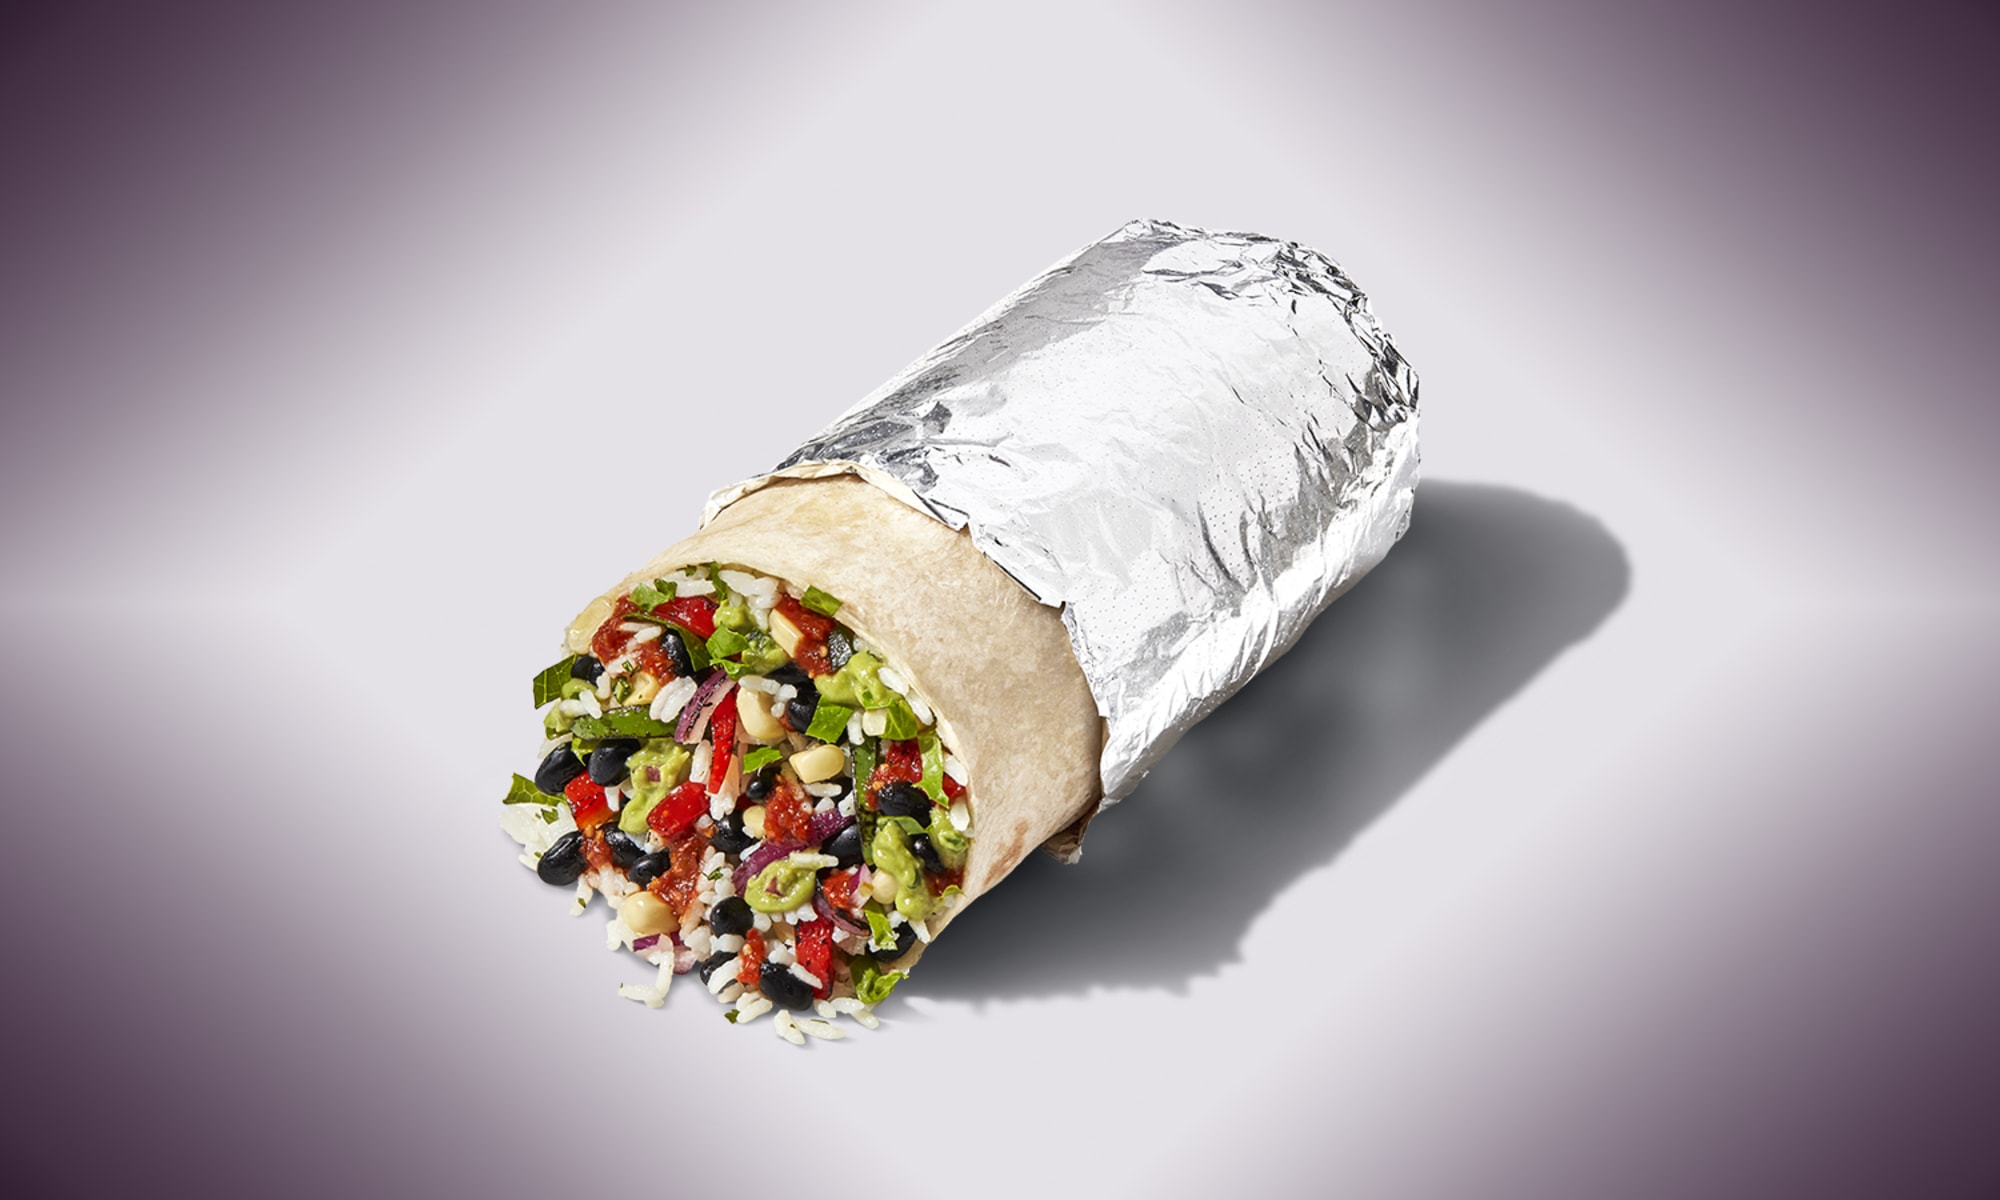 These tasty Burrito Day deals are no joke on April 1